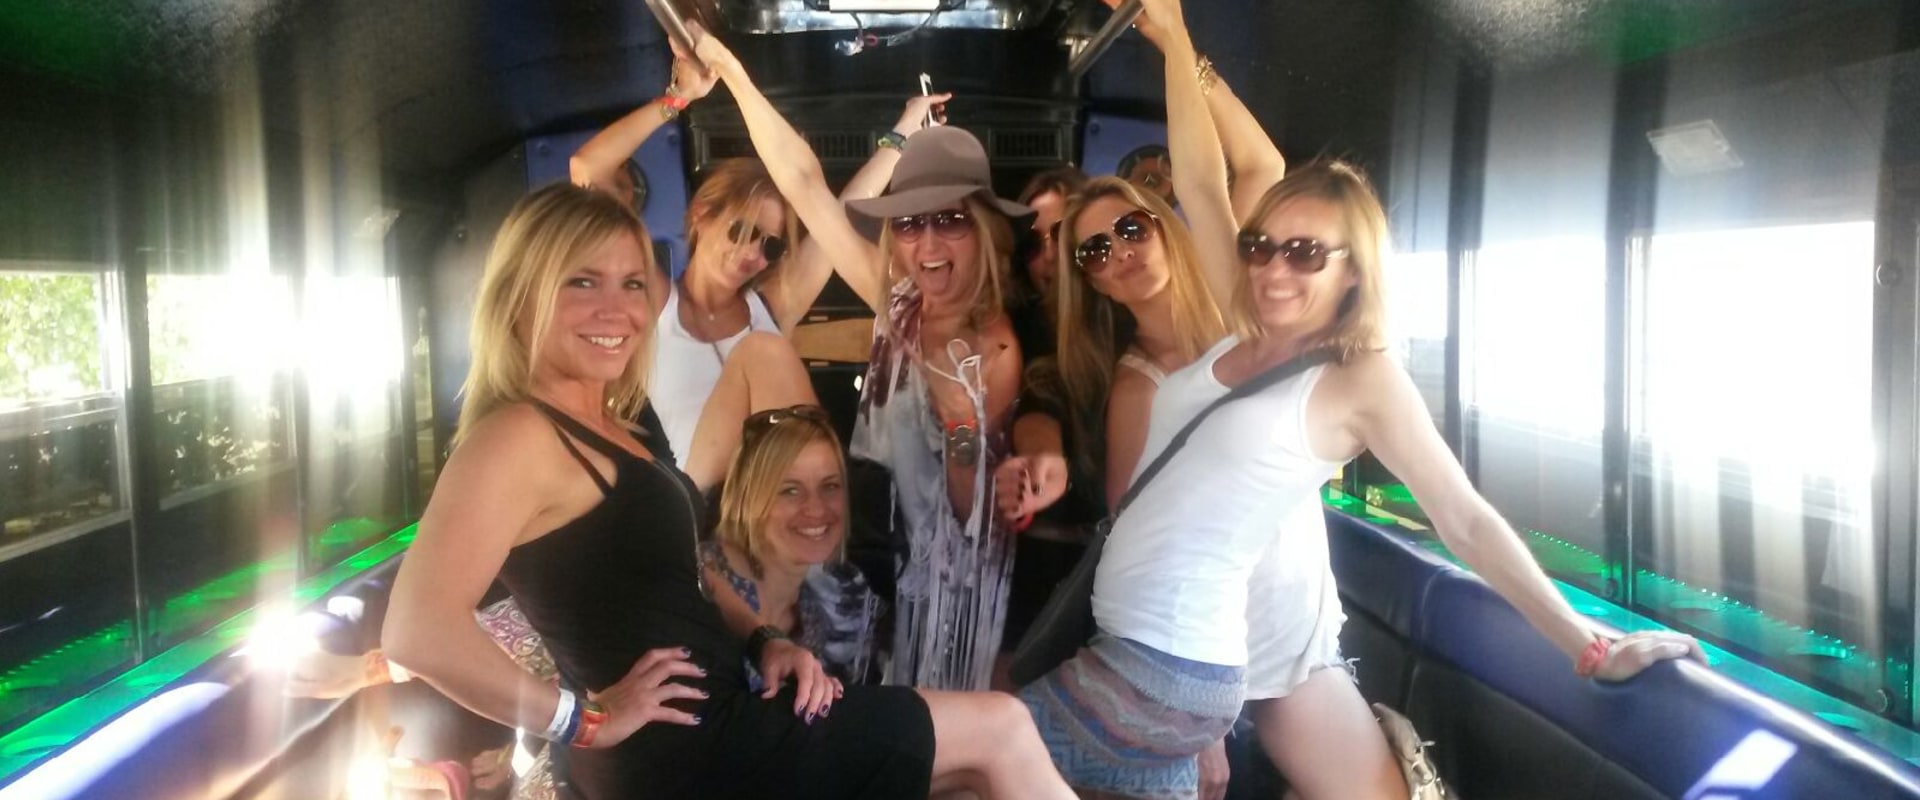 SATX Limousine and Party Bus Service Expands to Austin, Texas